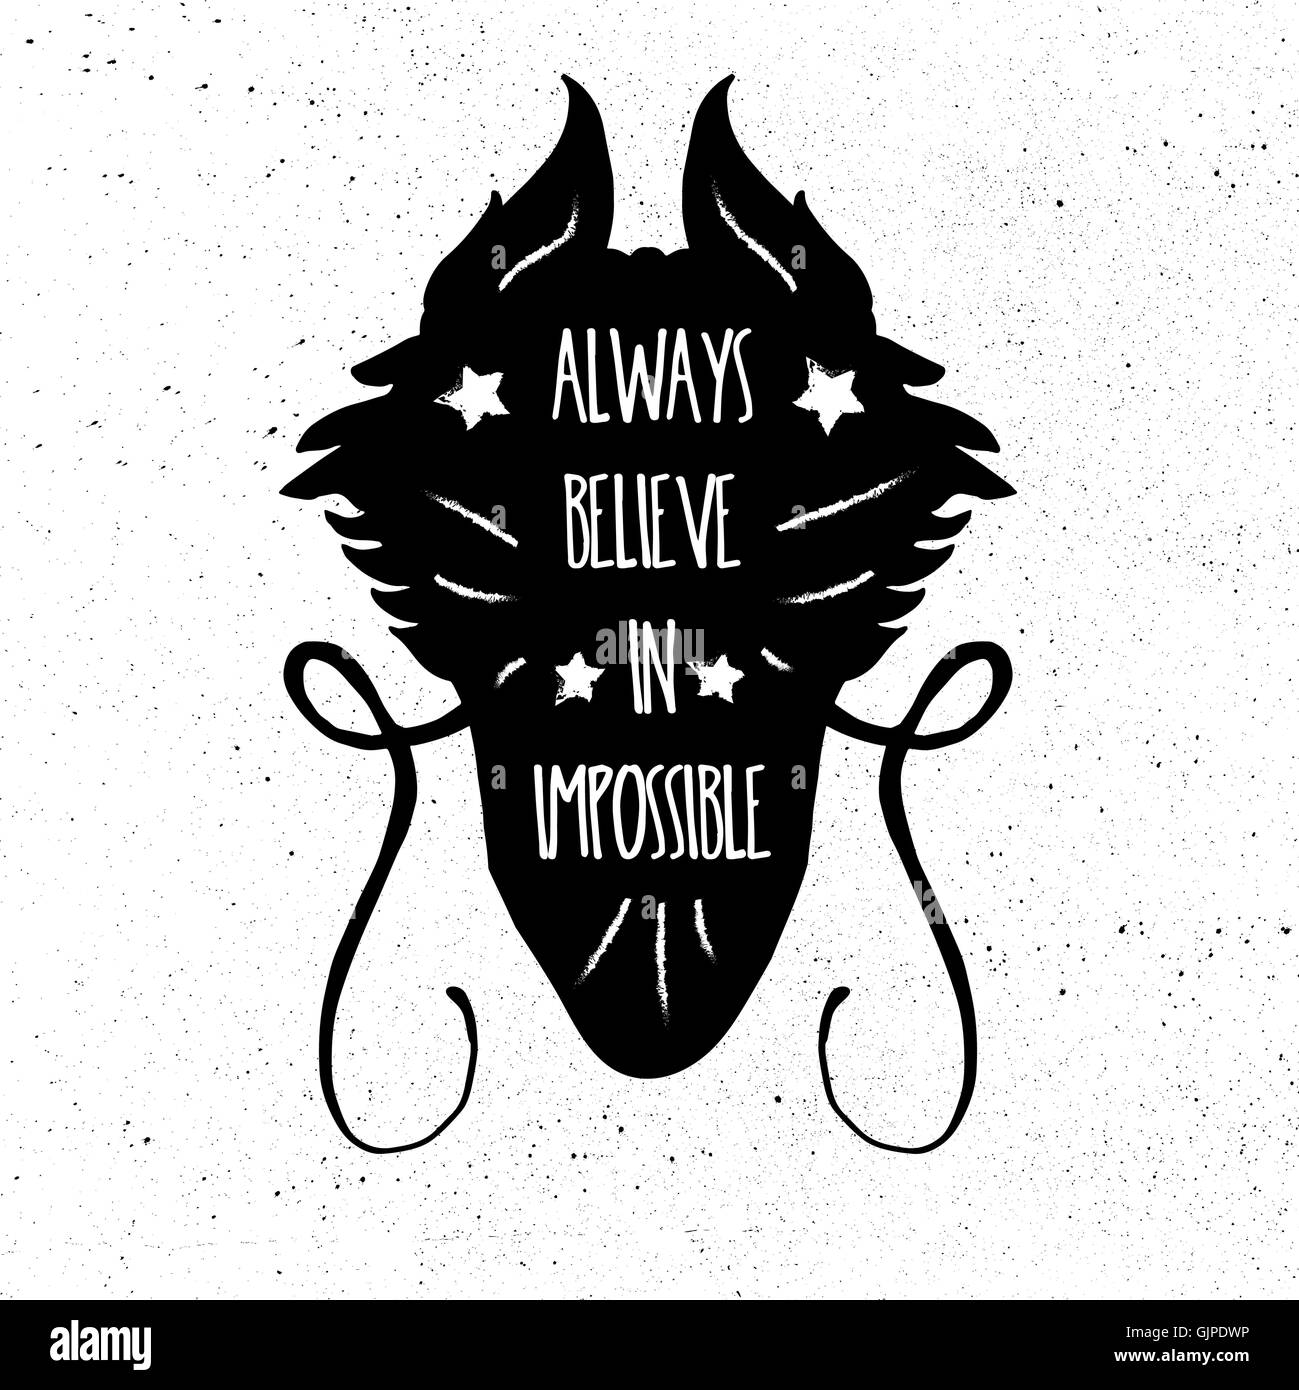 Lettering motivation poster. Quote about dream in dragon head silhouette for fabric, print, decor, greeting card. Always believe Stock Vector